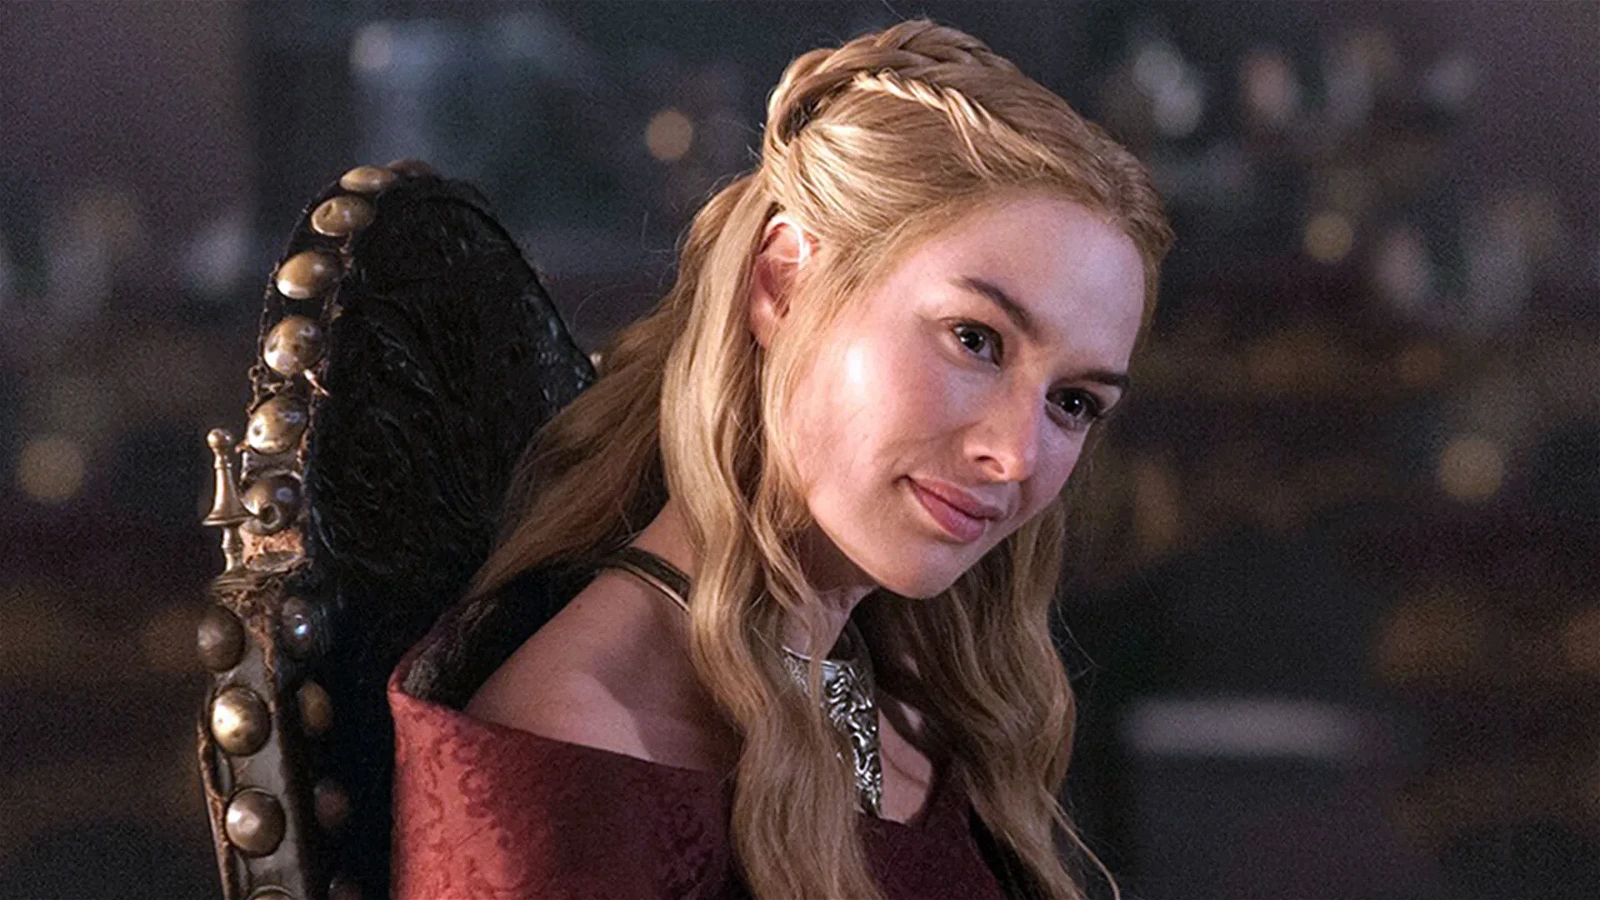 Lena Headey as Cersei Lannister ina still from Game of Thrones